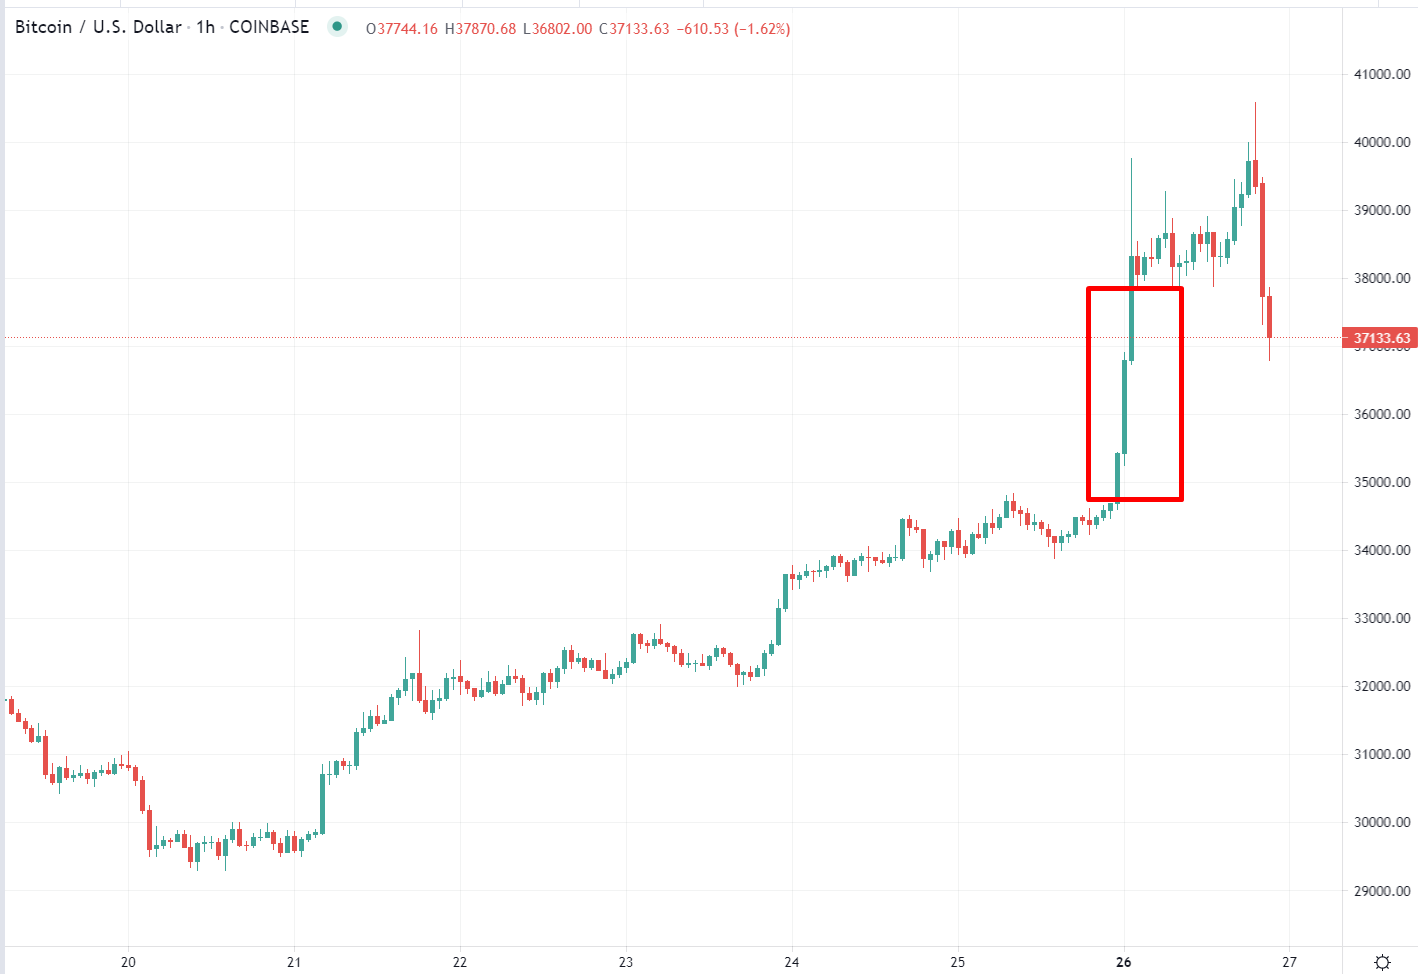 BTC is on the move, the down draft was triggered by Amazon's news: